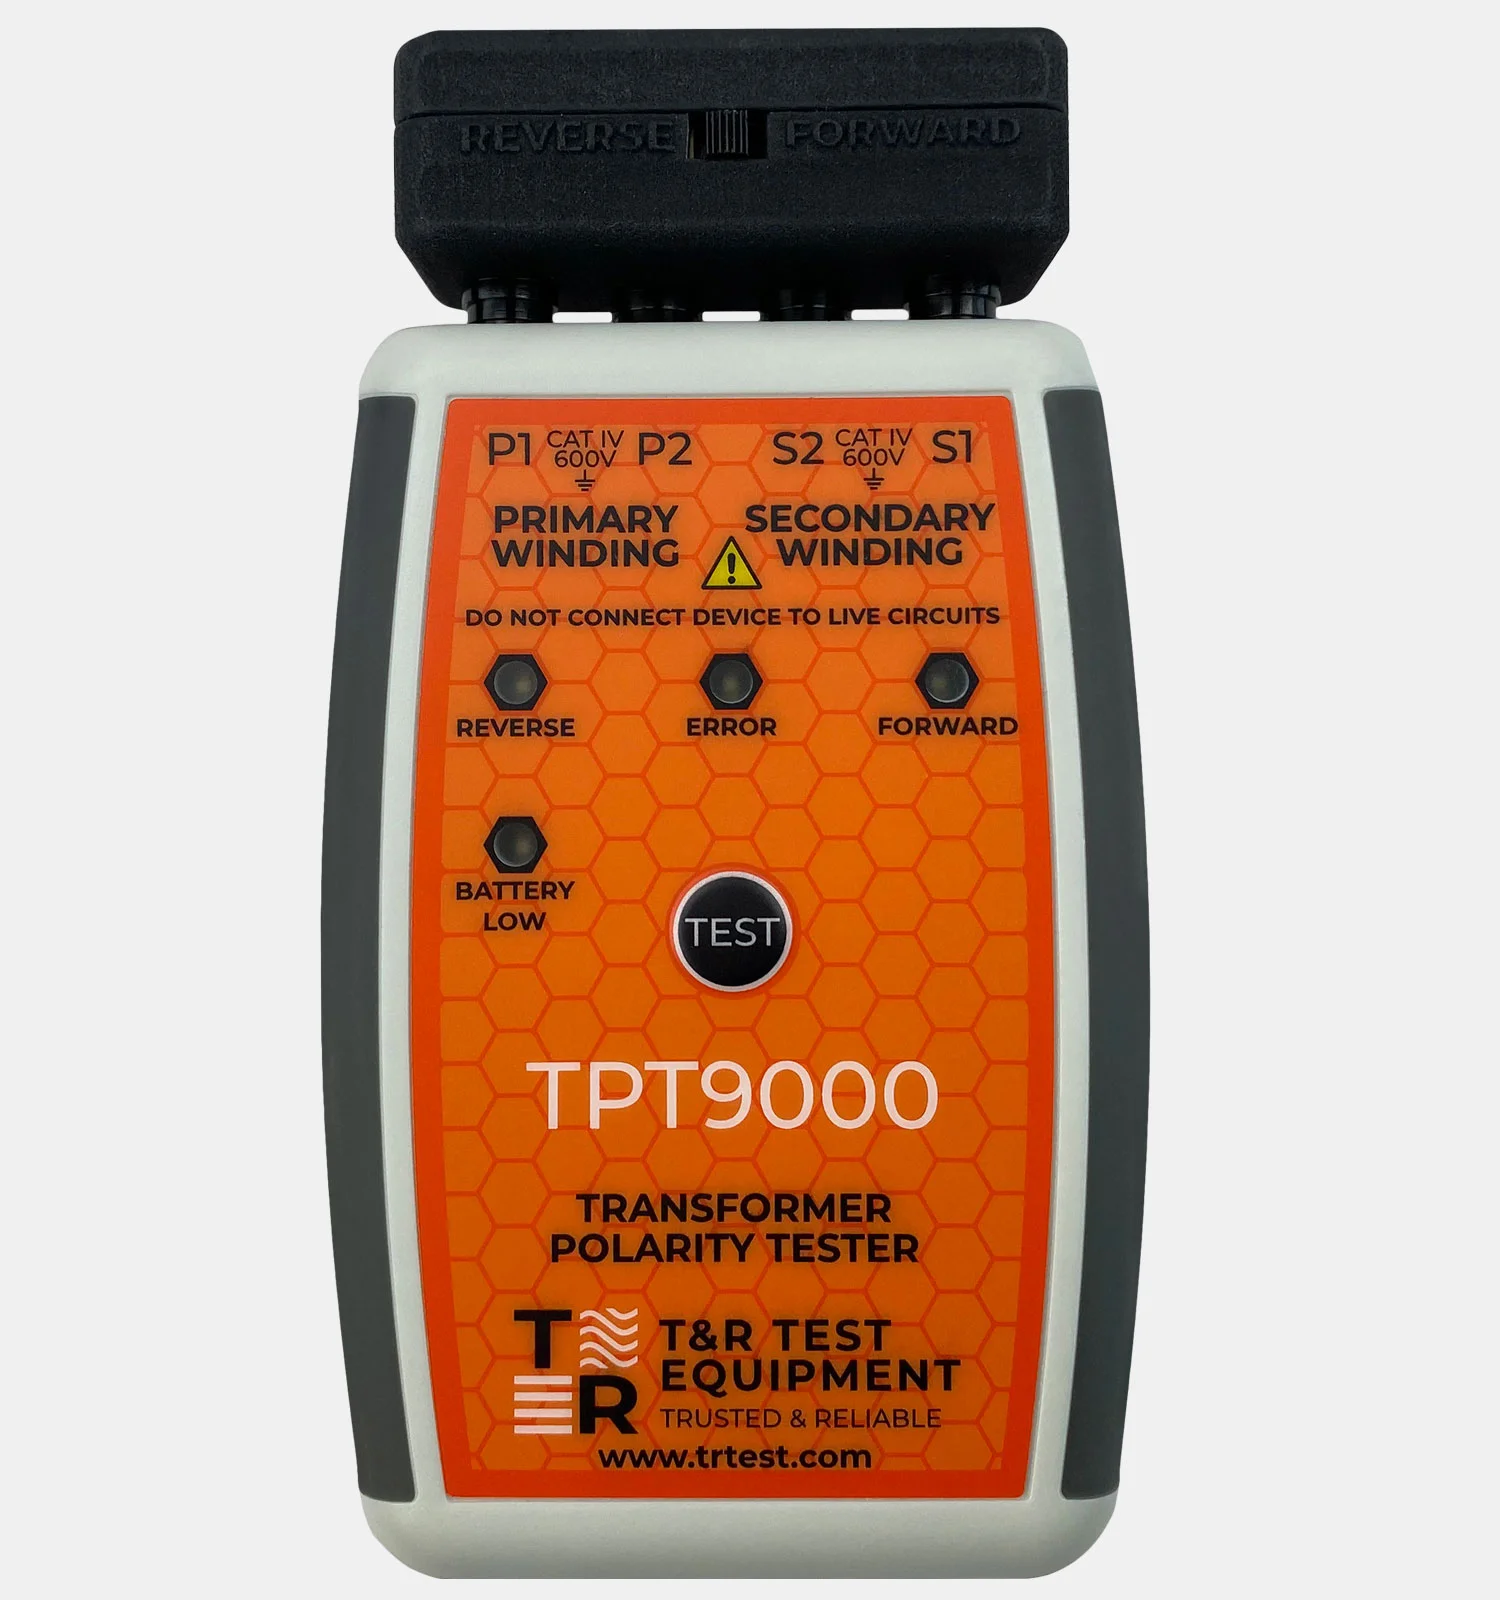 Suppliers of TPT9000 Transformer Polarity Tester UK